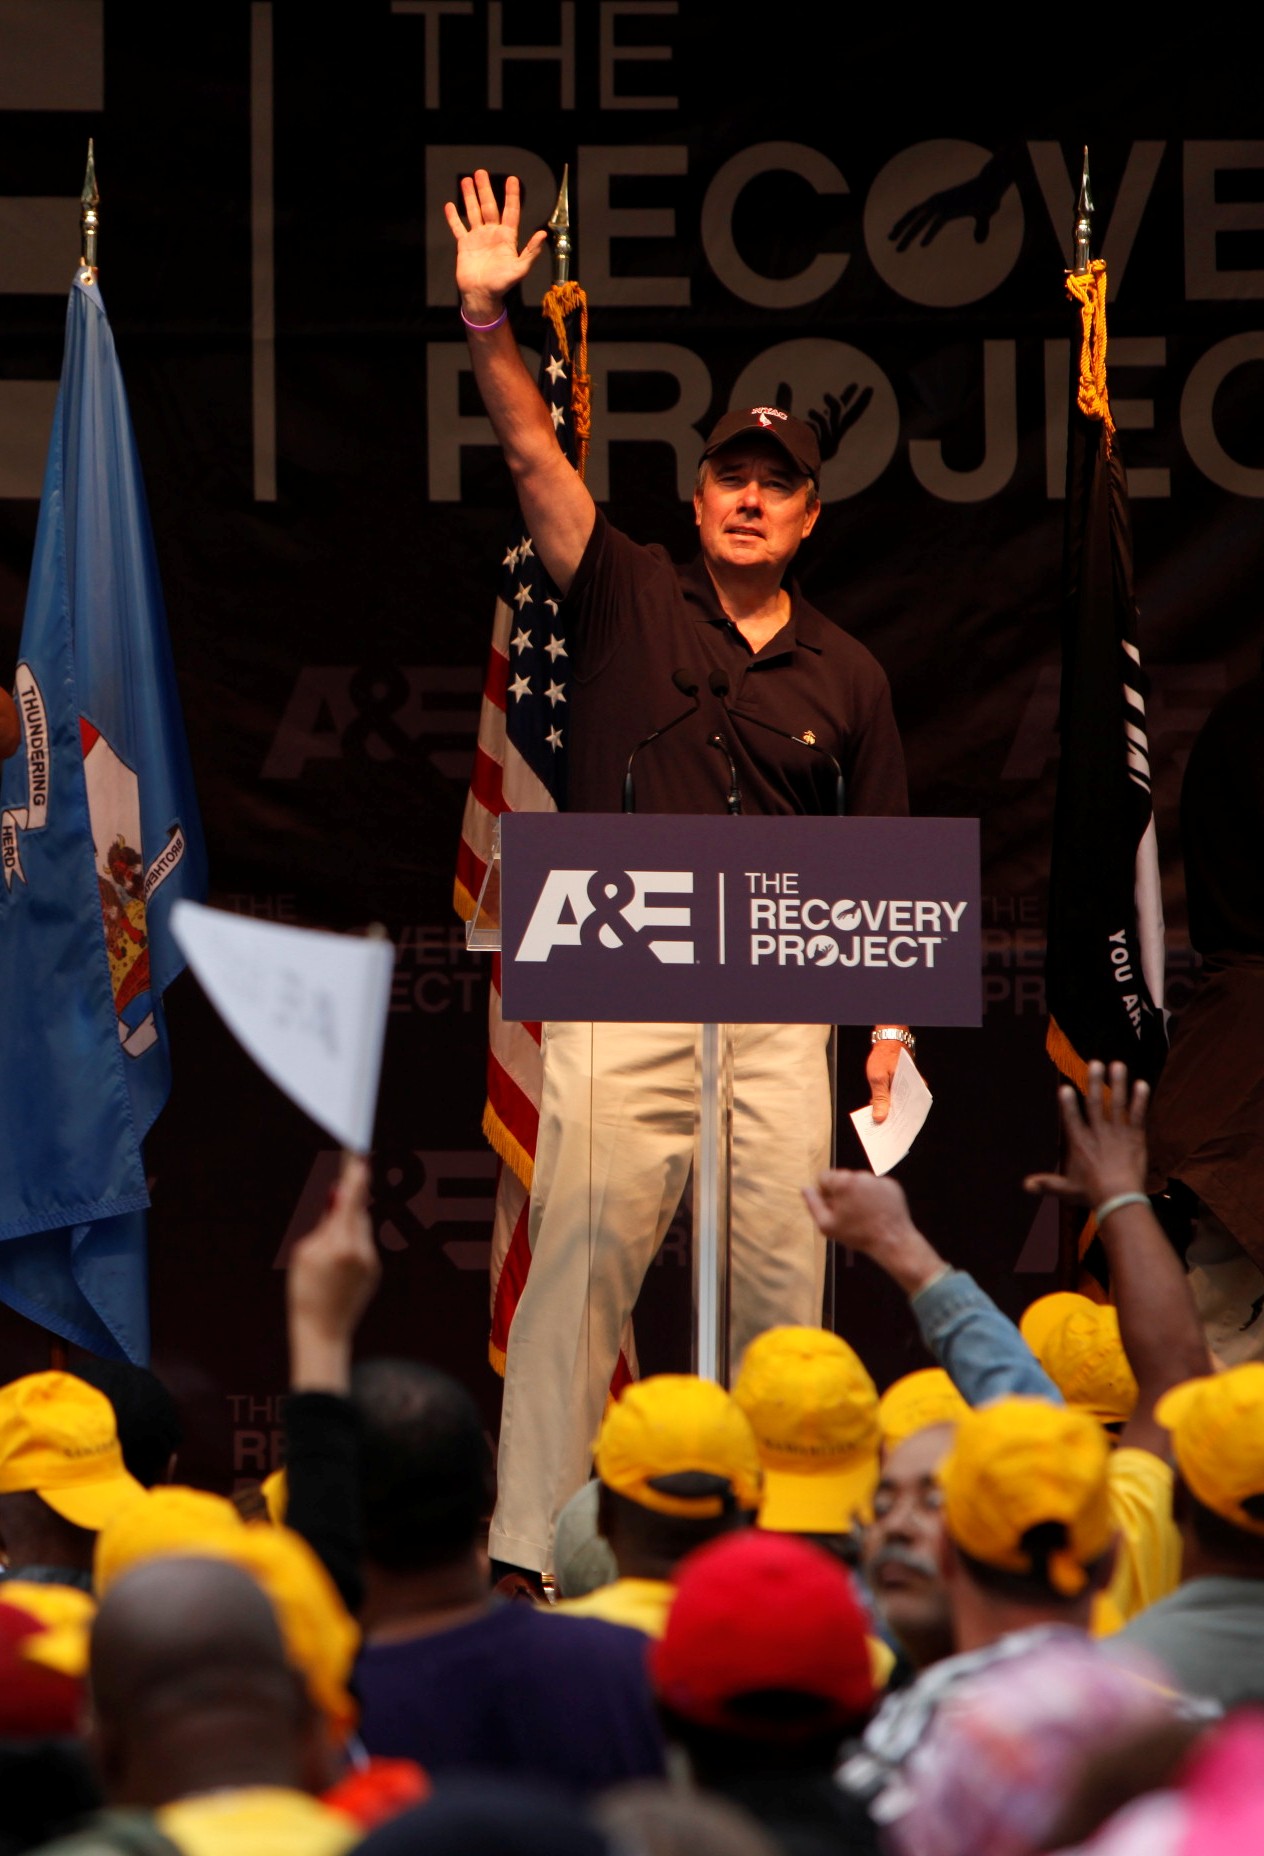 Photo of R. Gil Kerlikowske speaking at a rally for the A&E Network’s Recovery Project in 2009, prior to his CBP service